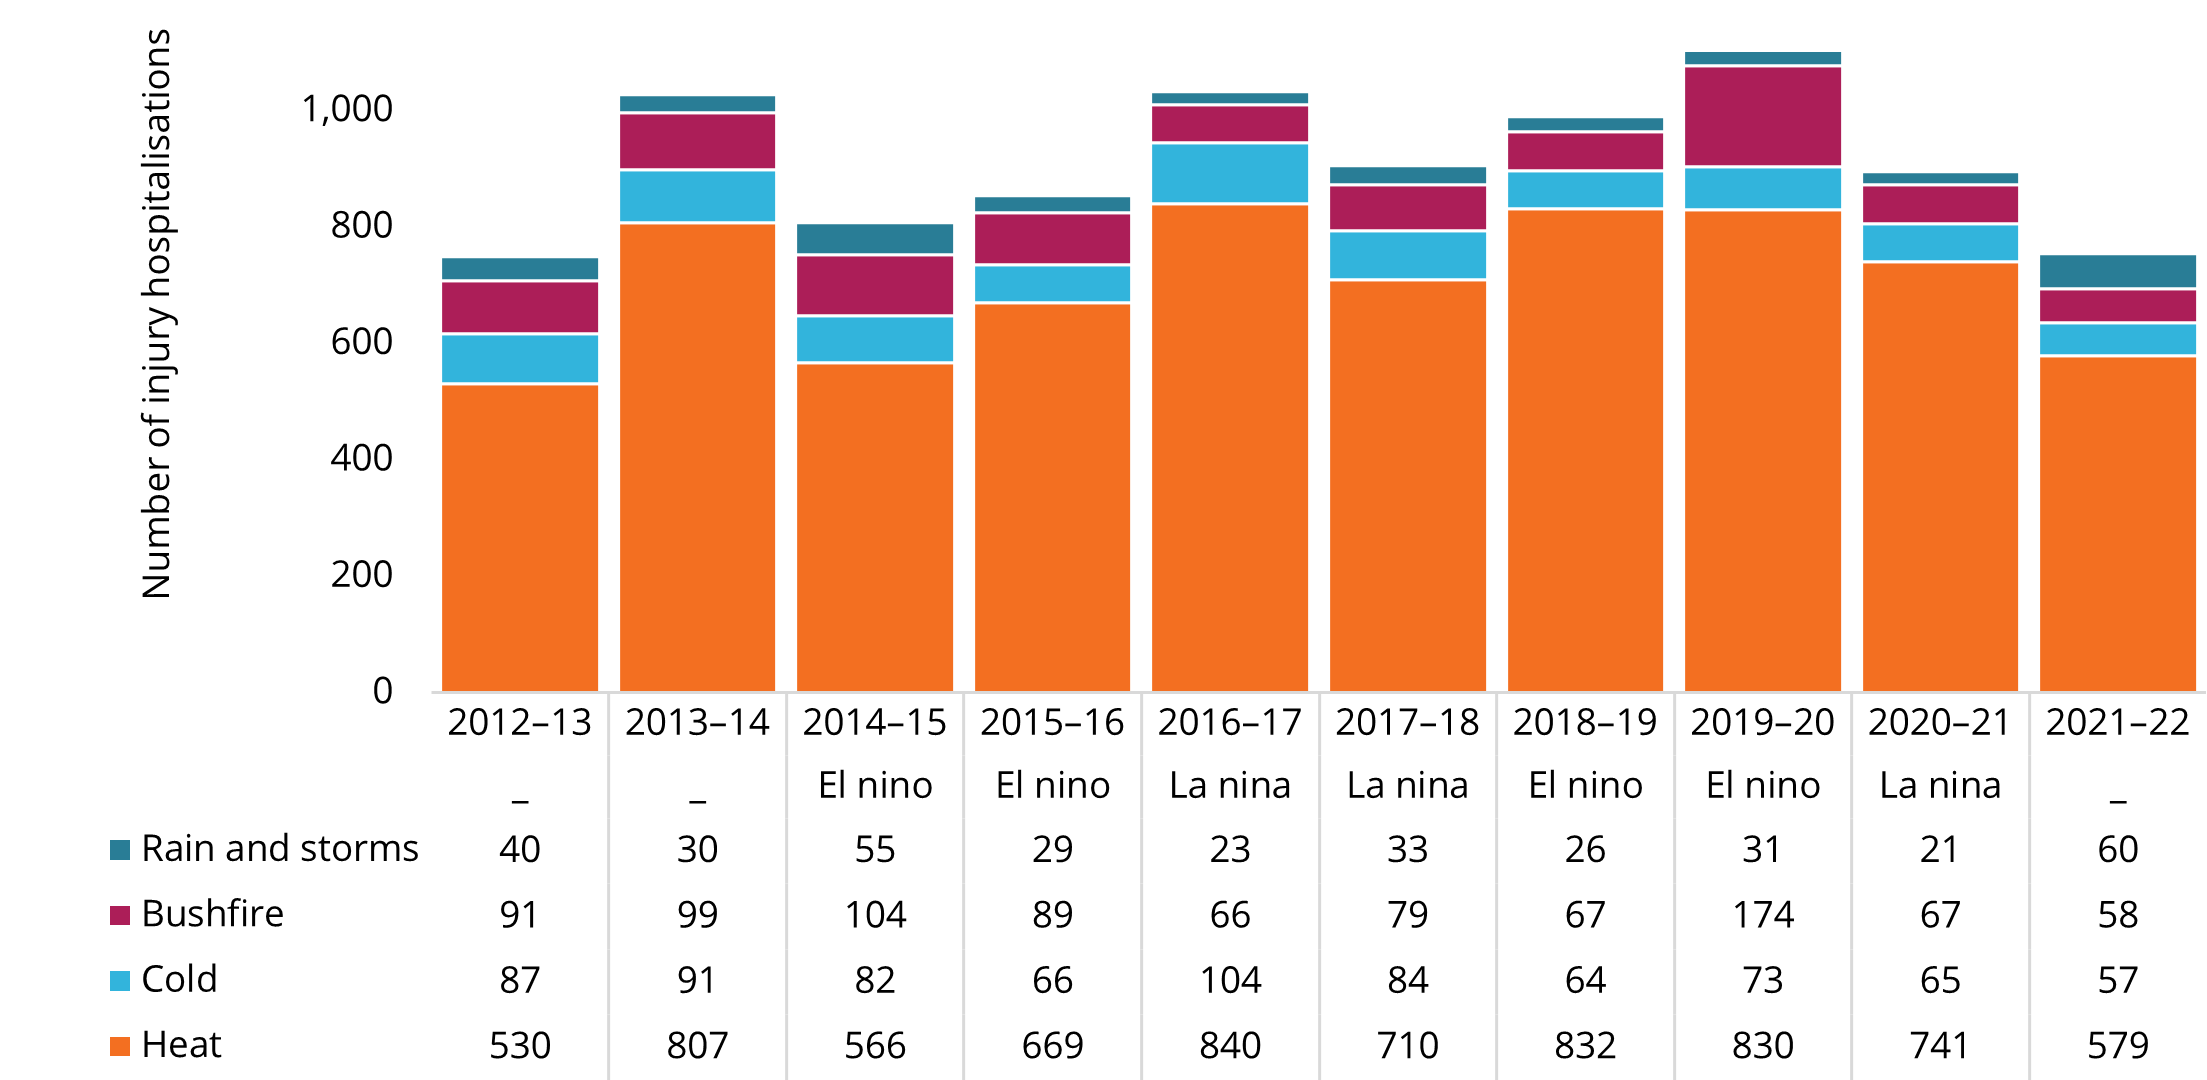 Of the four extreme weather events or hazards, extreme heat contributed to the highest number of cases of hospitalised injury between 2012 and 2022, with hospitalisations varying with El Nino and La Nina years. Bushfire hospitalisations peaked at 174 in 2019–20, and there were more hospitalisations related to extreme cold than rain and storms across most years.